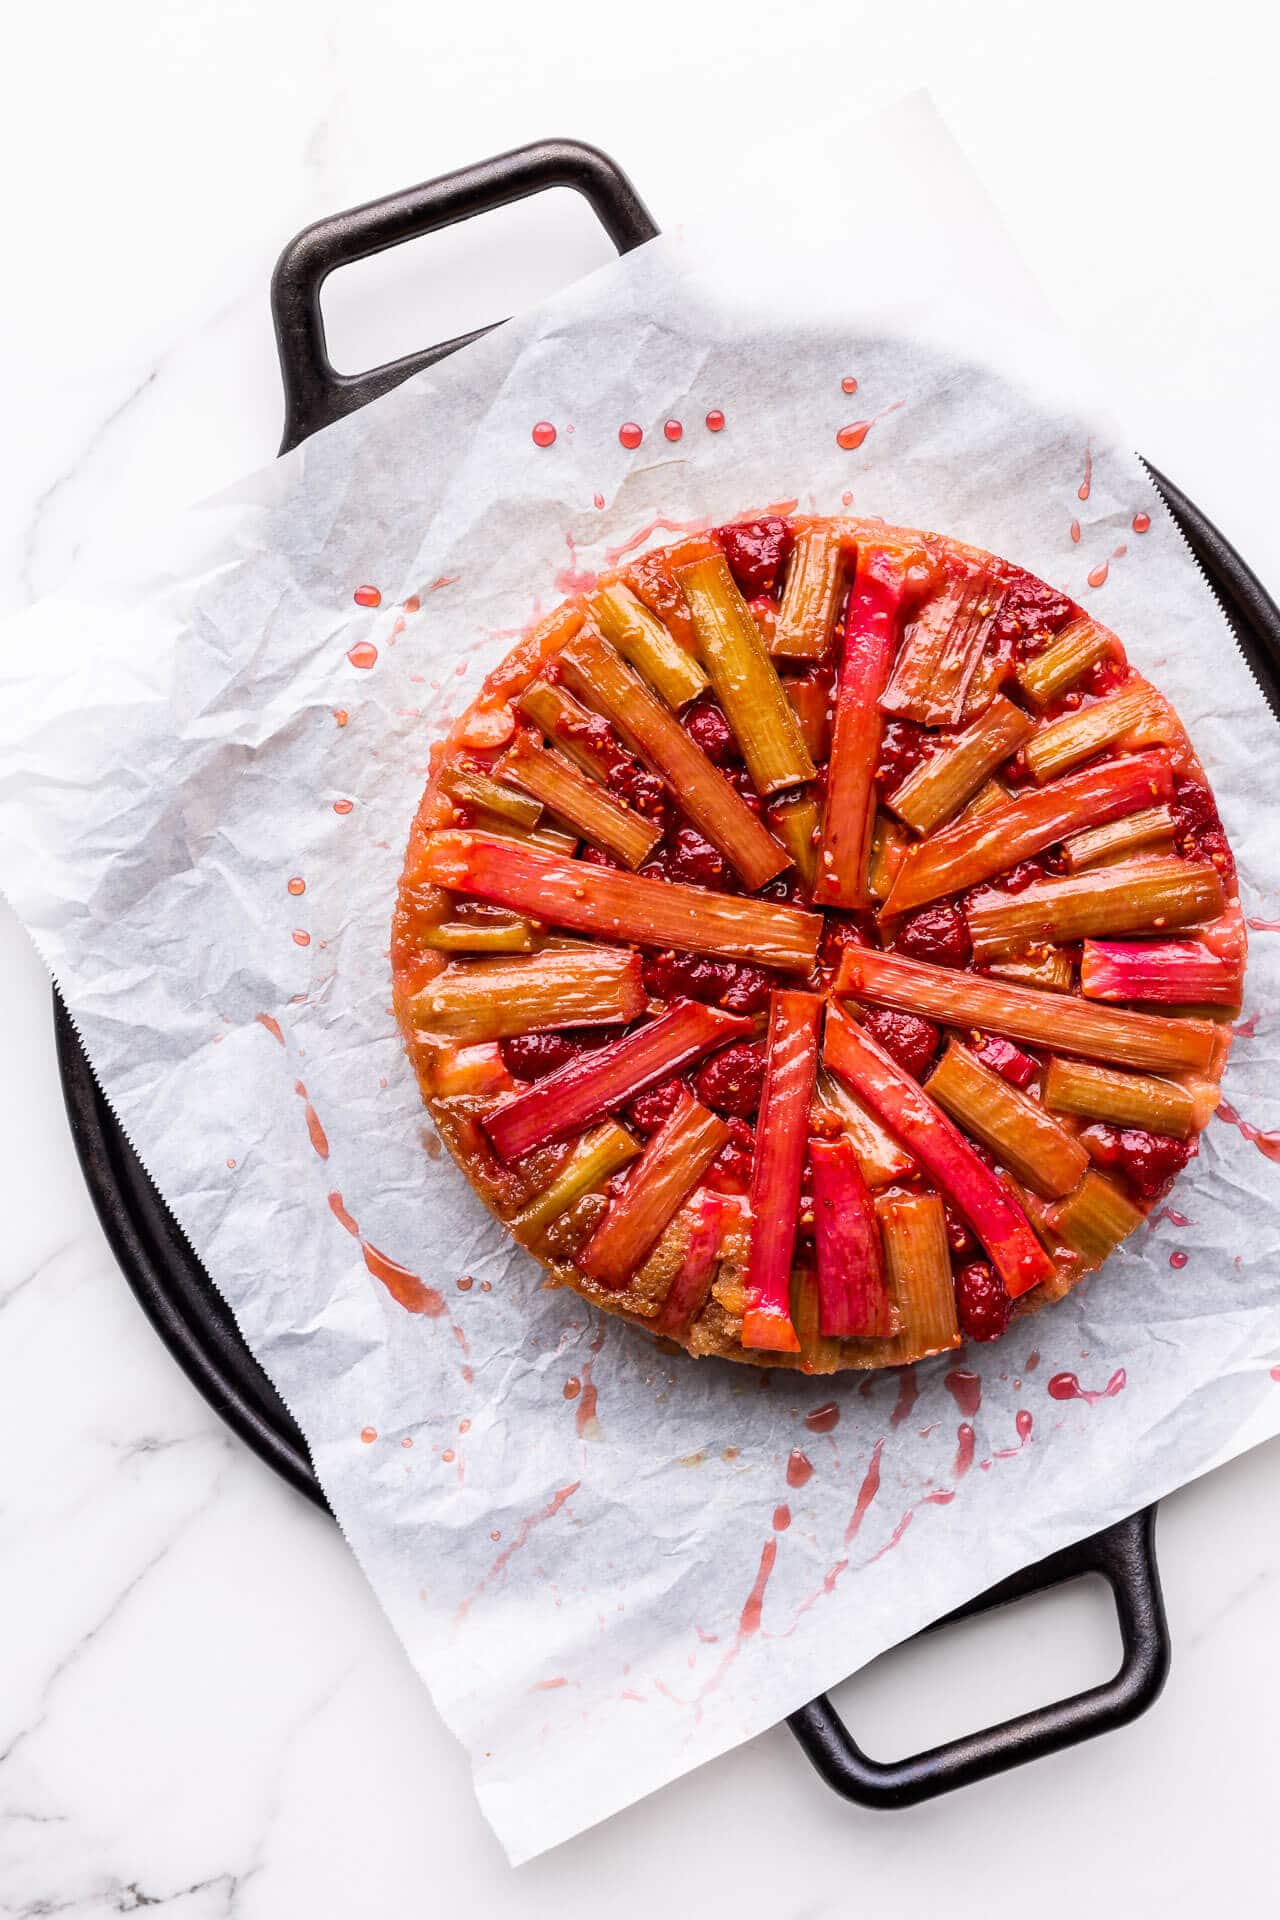 Raspberry rhubarb upside down cake on a parchment lined black round tray